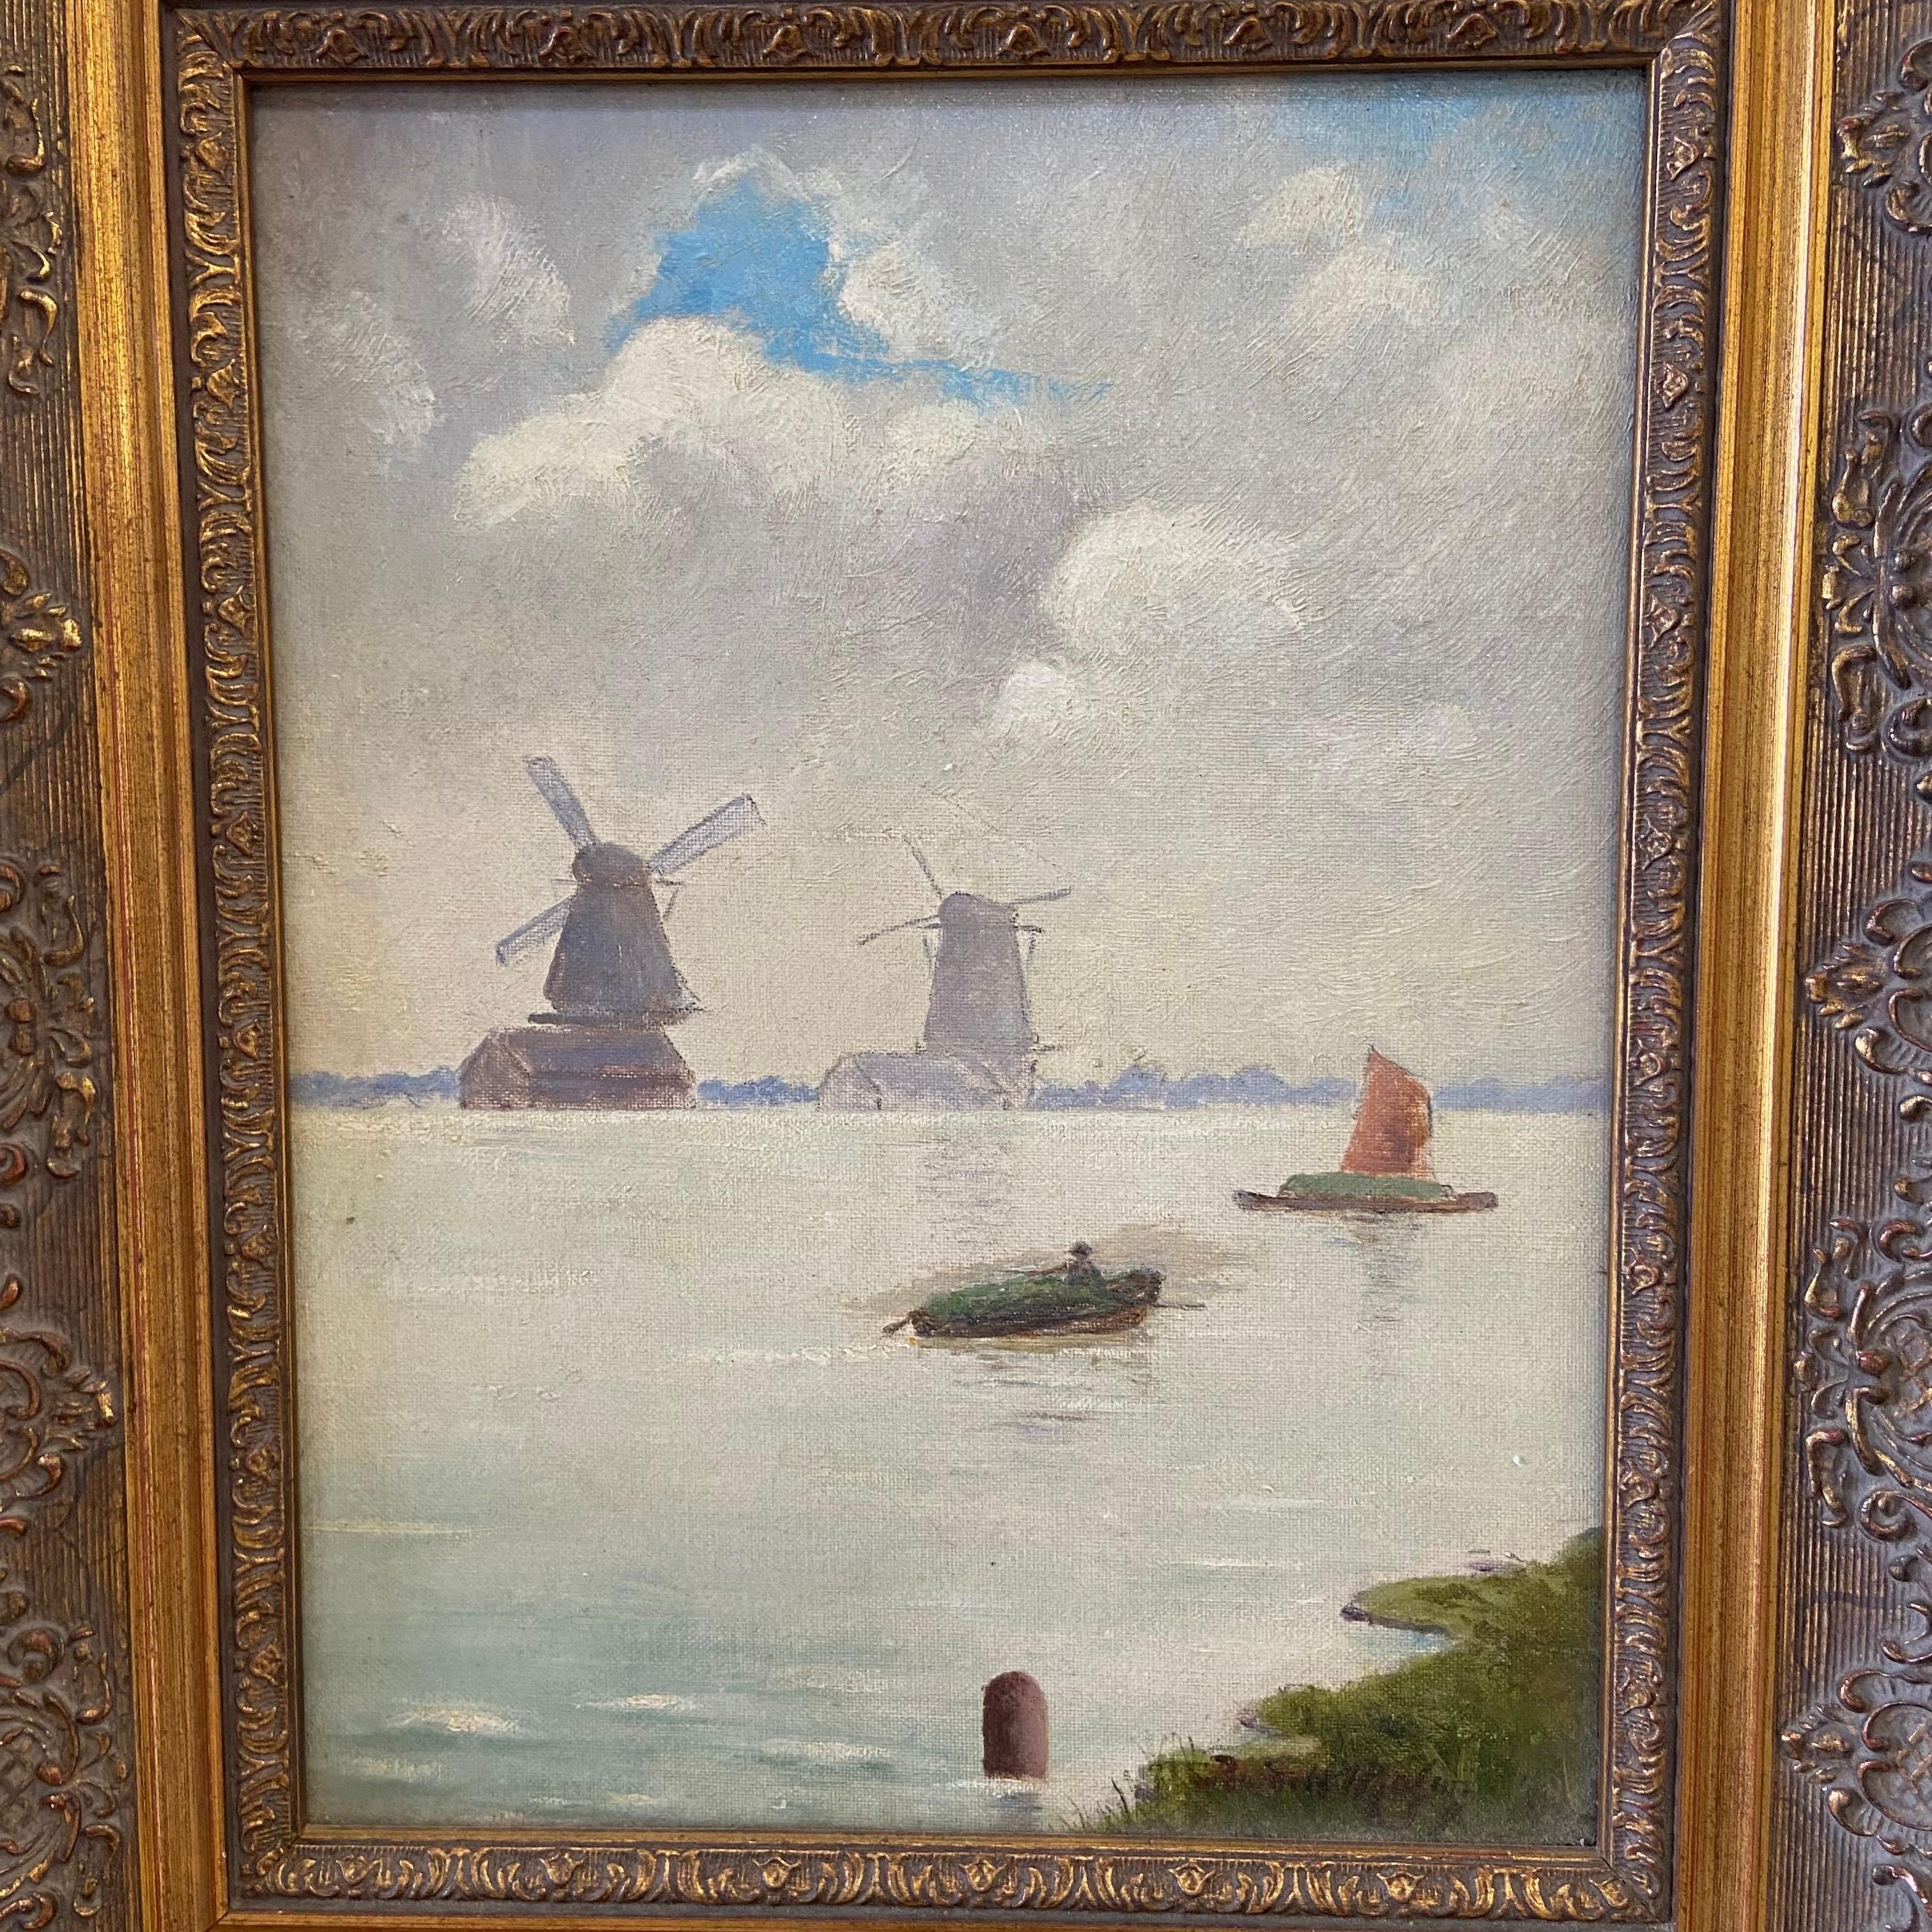 Vintage oil painting of Holland Mill in gilt wood frame
signed by Burdett Mason
c1940
Measures: 15-3/4”W x 19”H x 1-5/8”D.